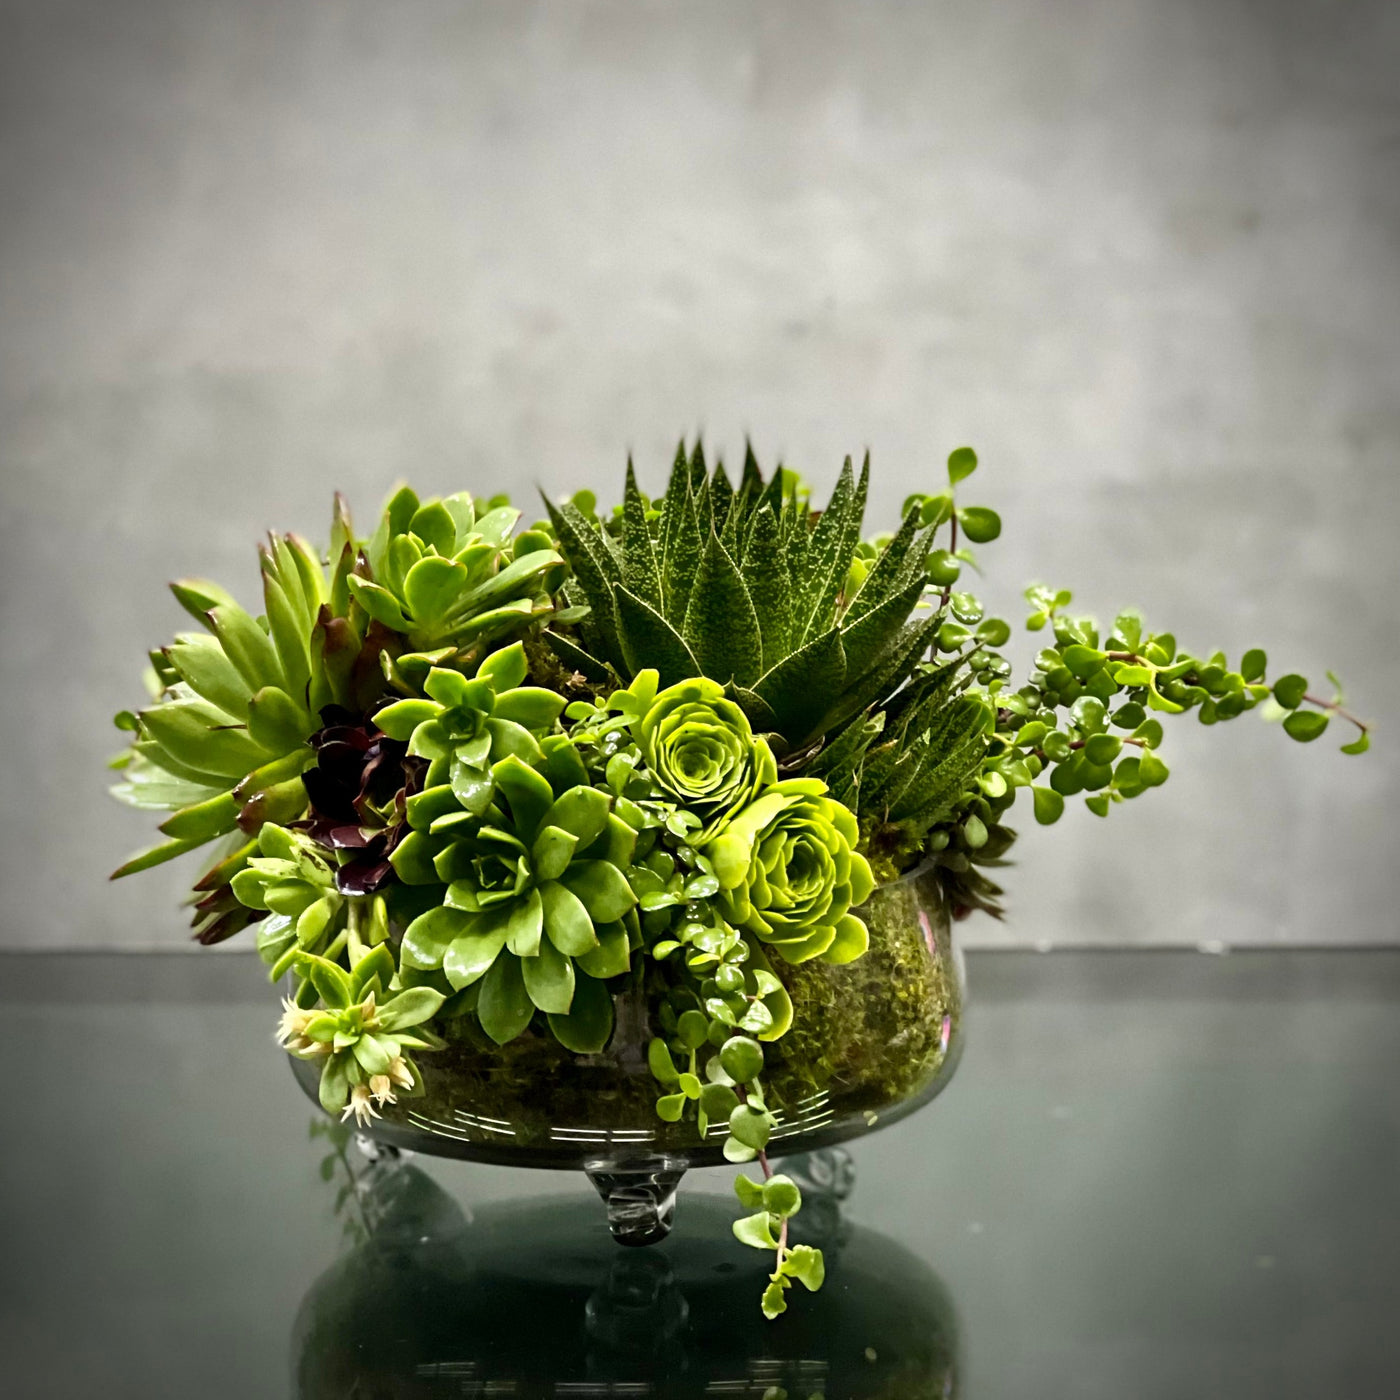 Beverly Hills Florist offers our green With Envy for same day delivery ! This green spectacular mix of succulents in a modern mossed filled clear footed vase. Making for a wonderful and simplistic get well, birthday or for him arrangement. 